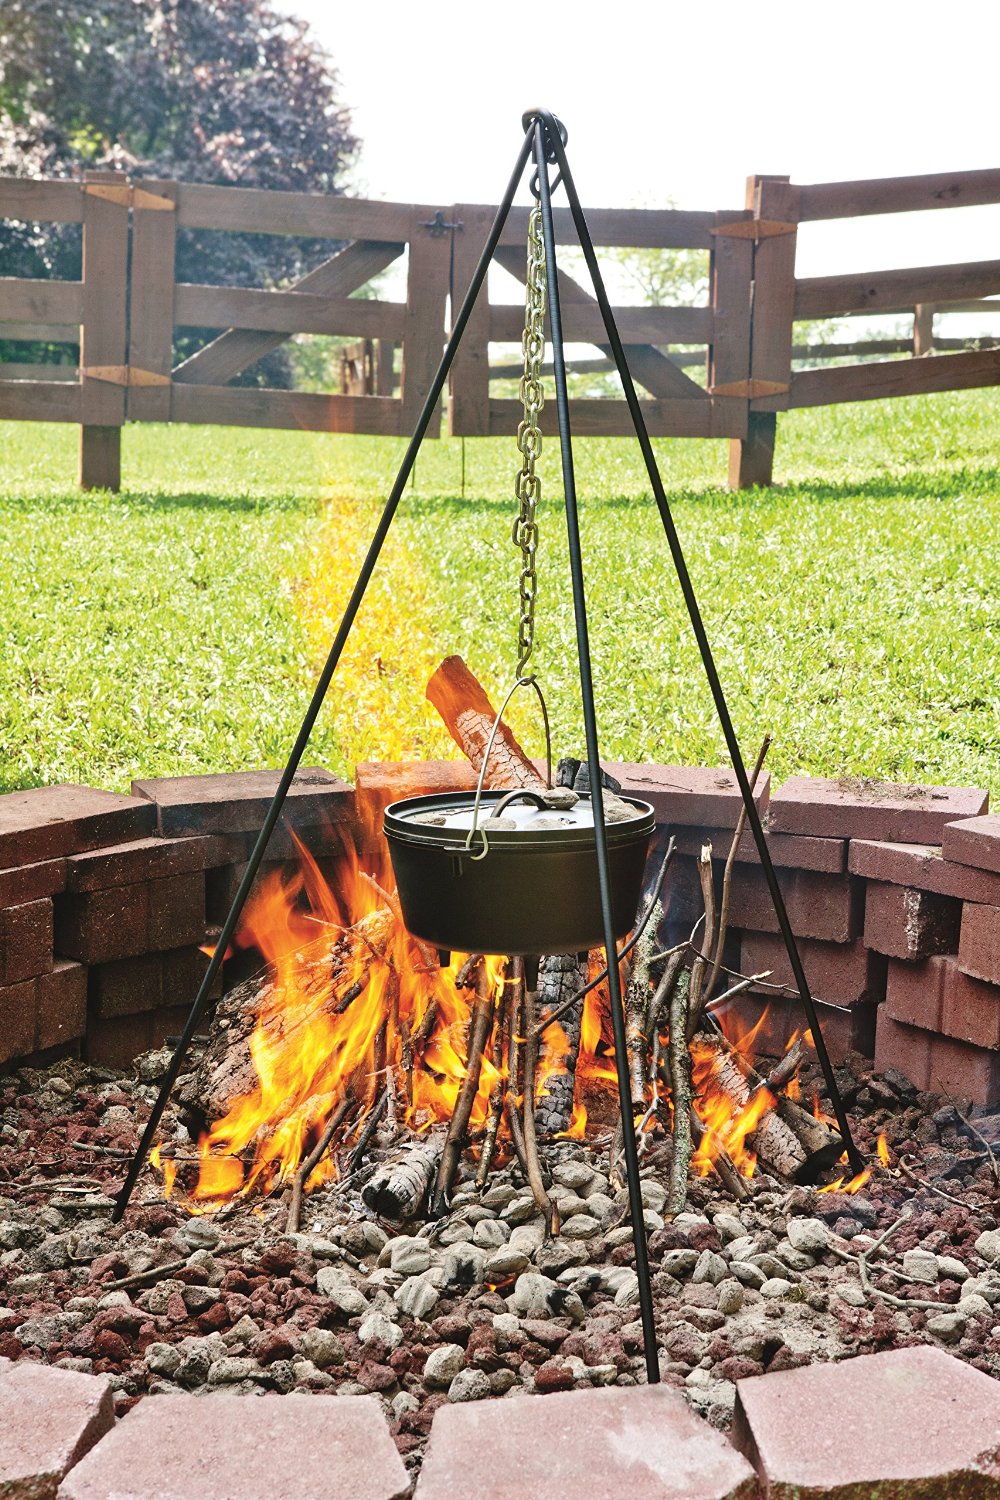 Lodge L12DCO3 Deep Cast-Iron Camp Dutch Oven with lid & Legs, 12, 8 Q